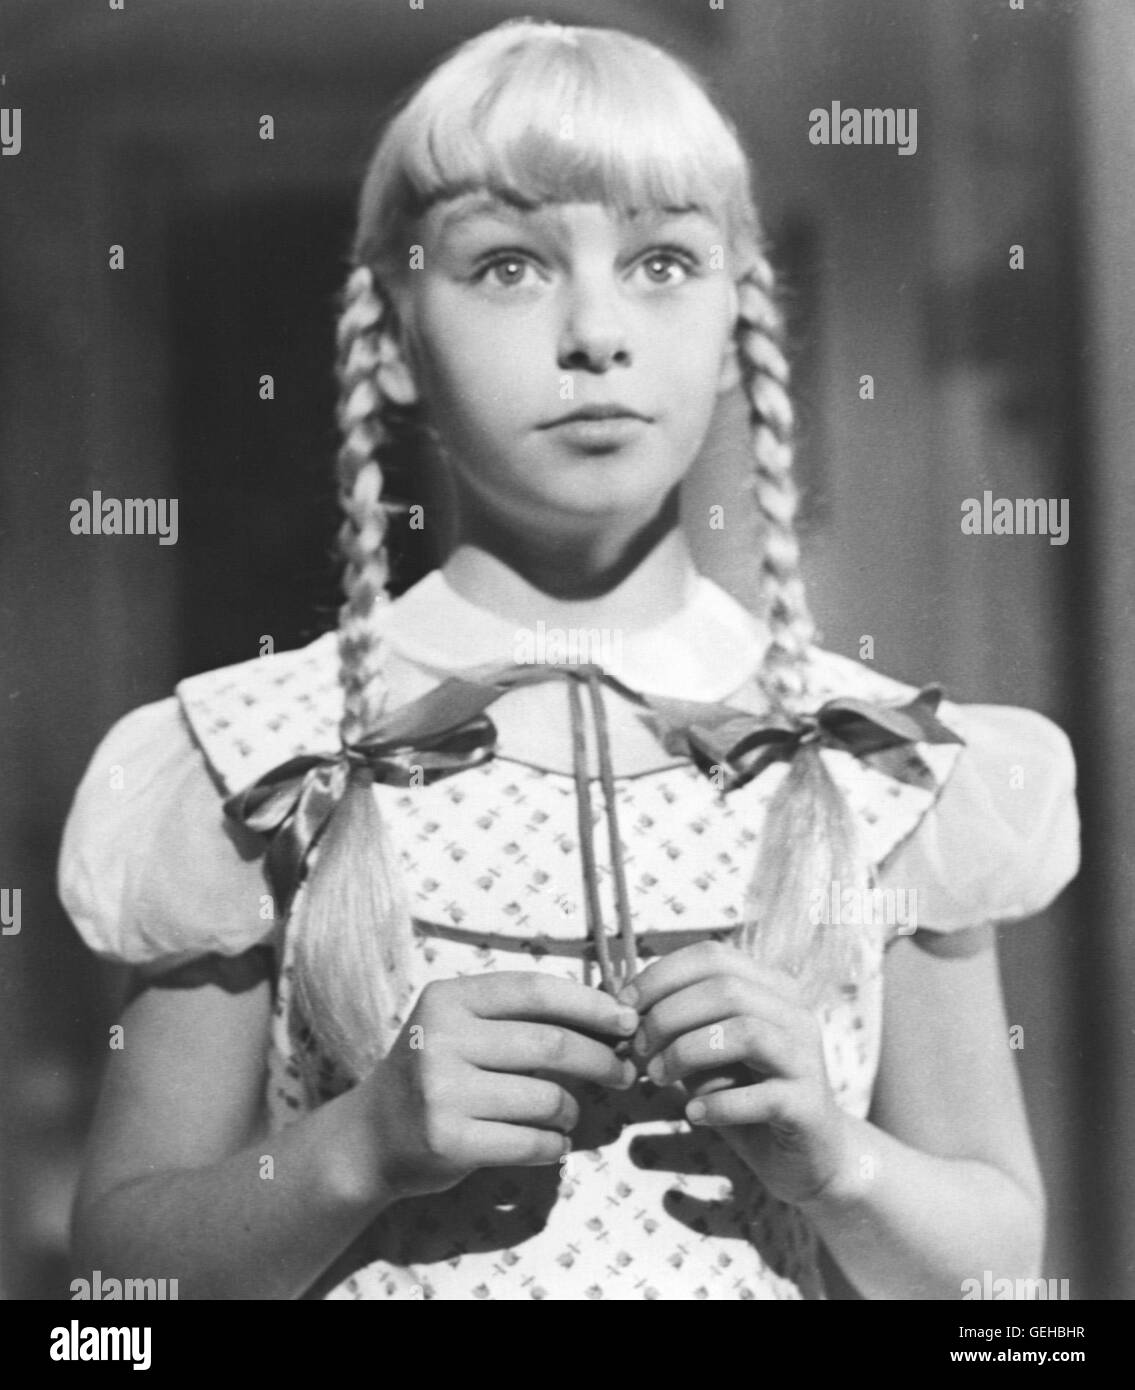 THE BAD SEED, Patty McCormack, 1956 Stock Photo. 